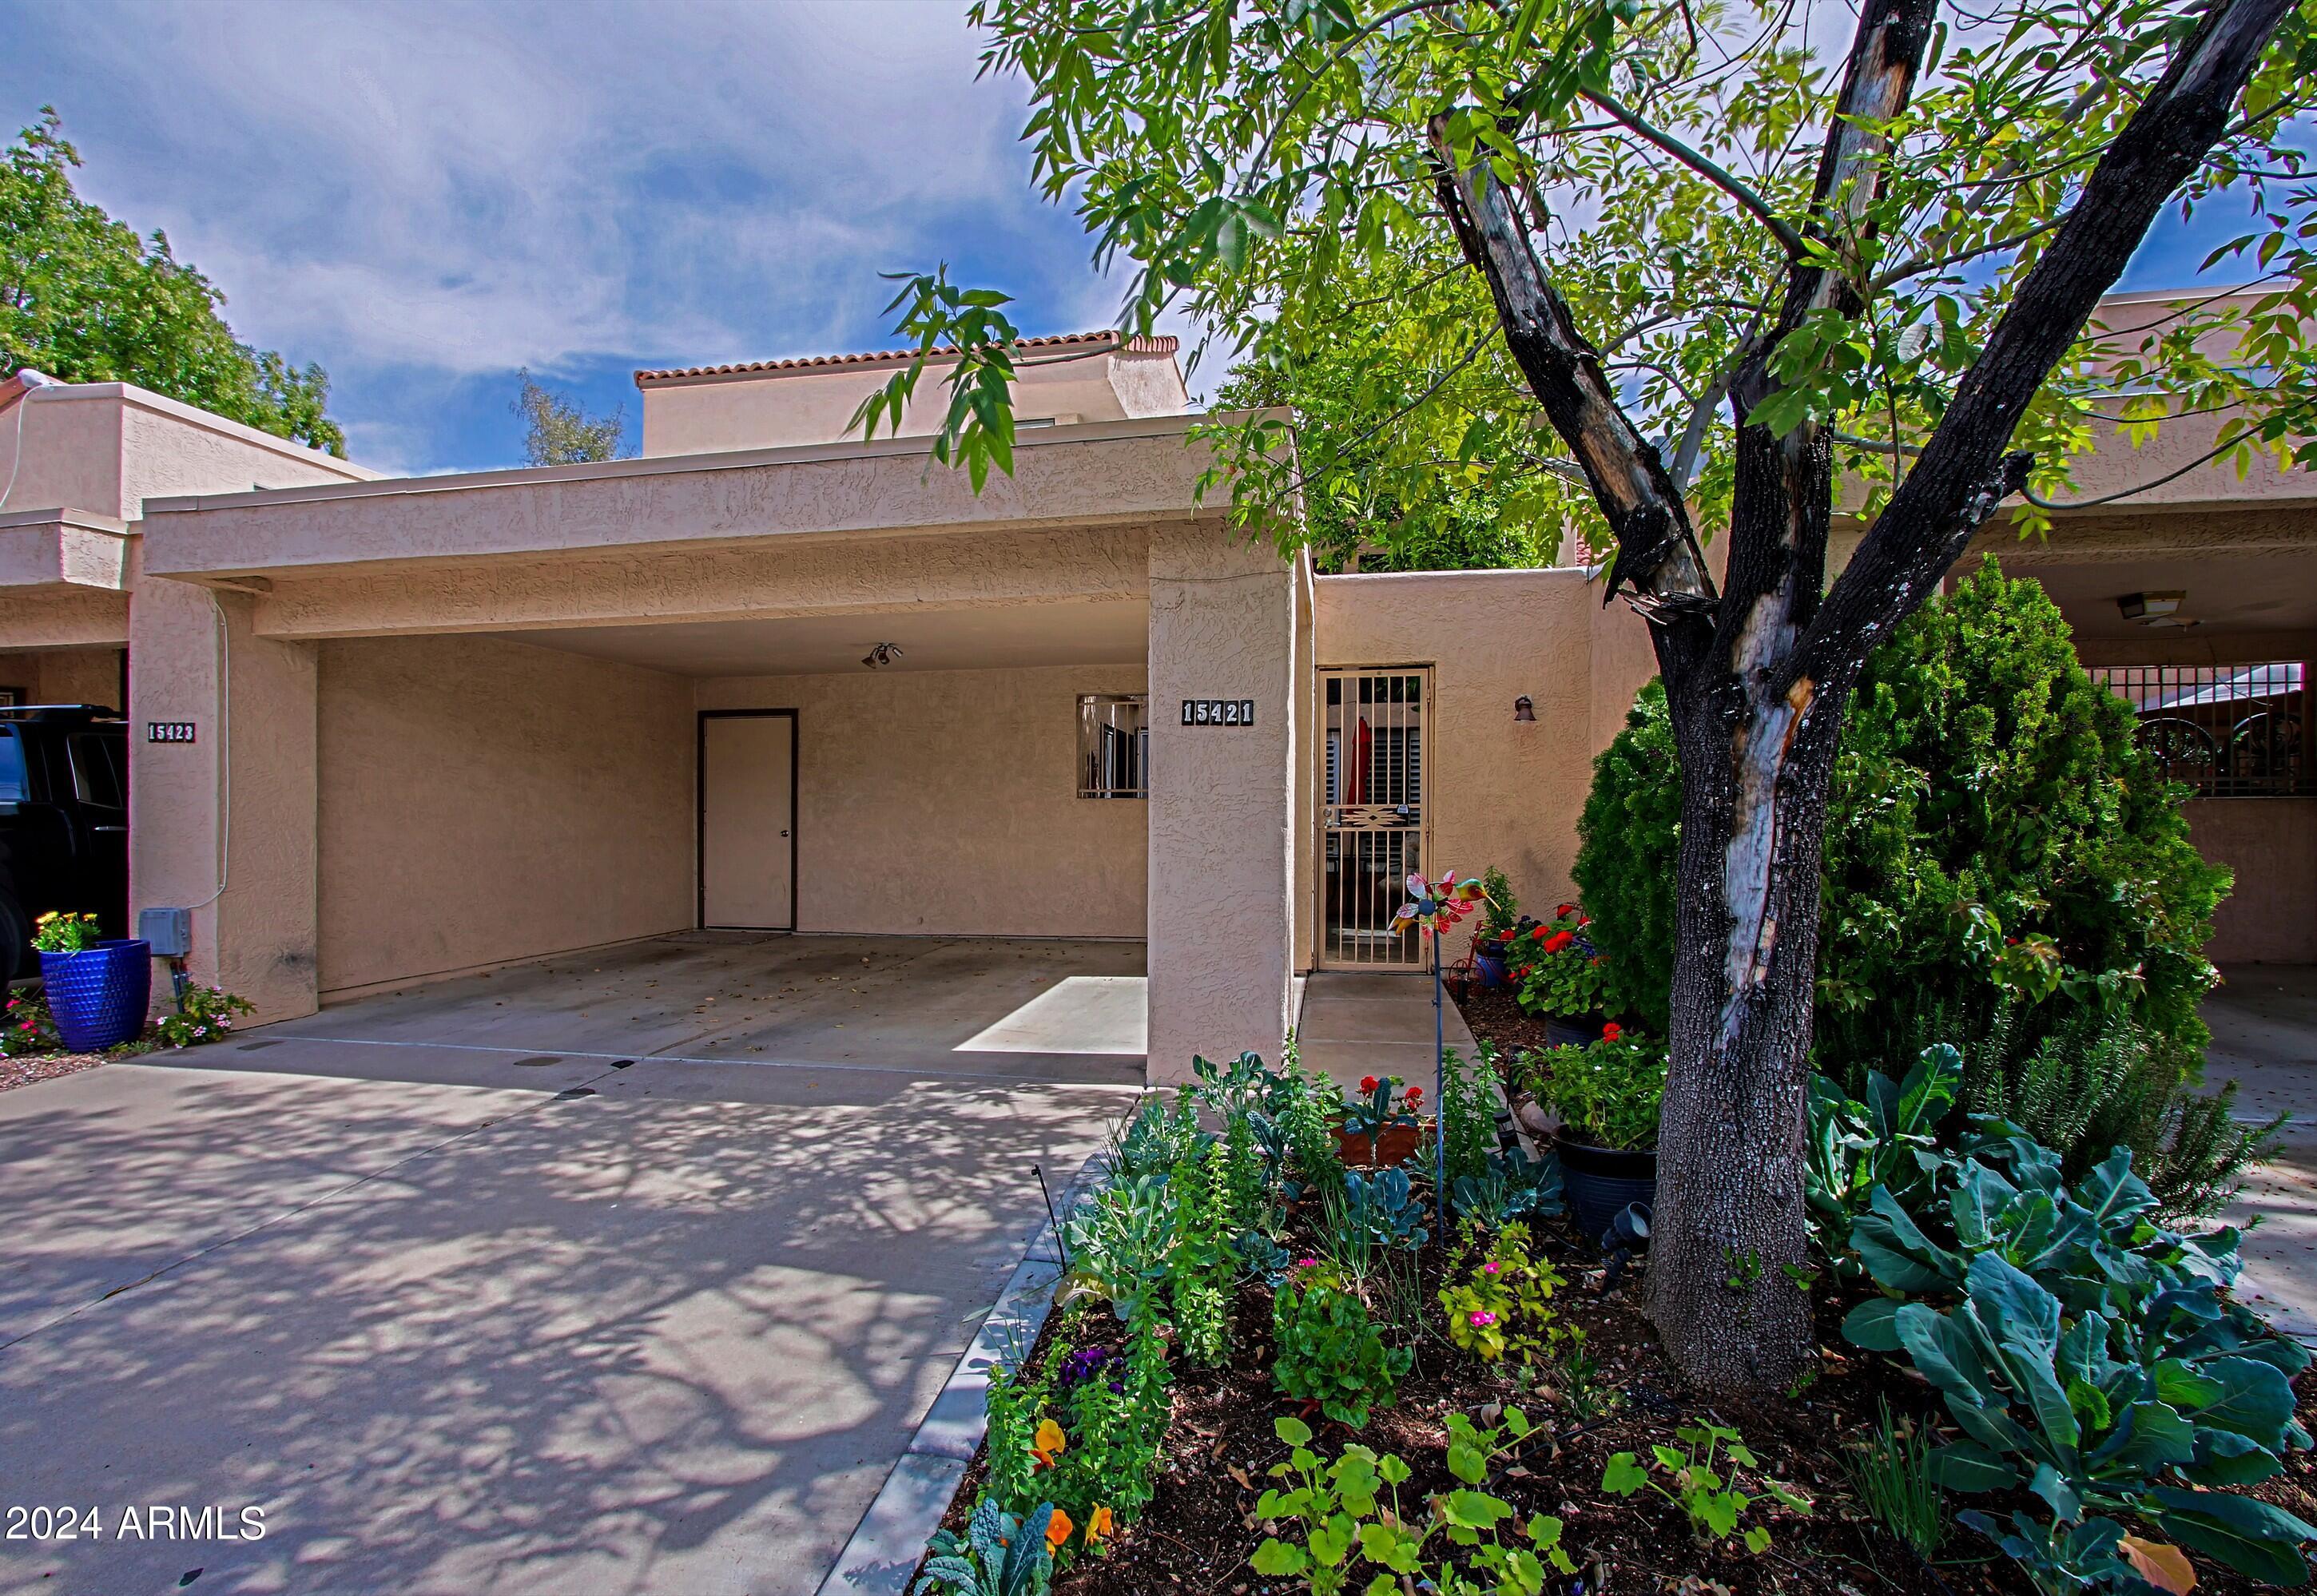 Photo one of 15421 N Central Ave Phoenix AZ 85022 | MLS 6679708